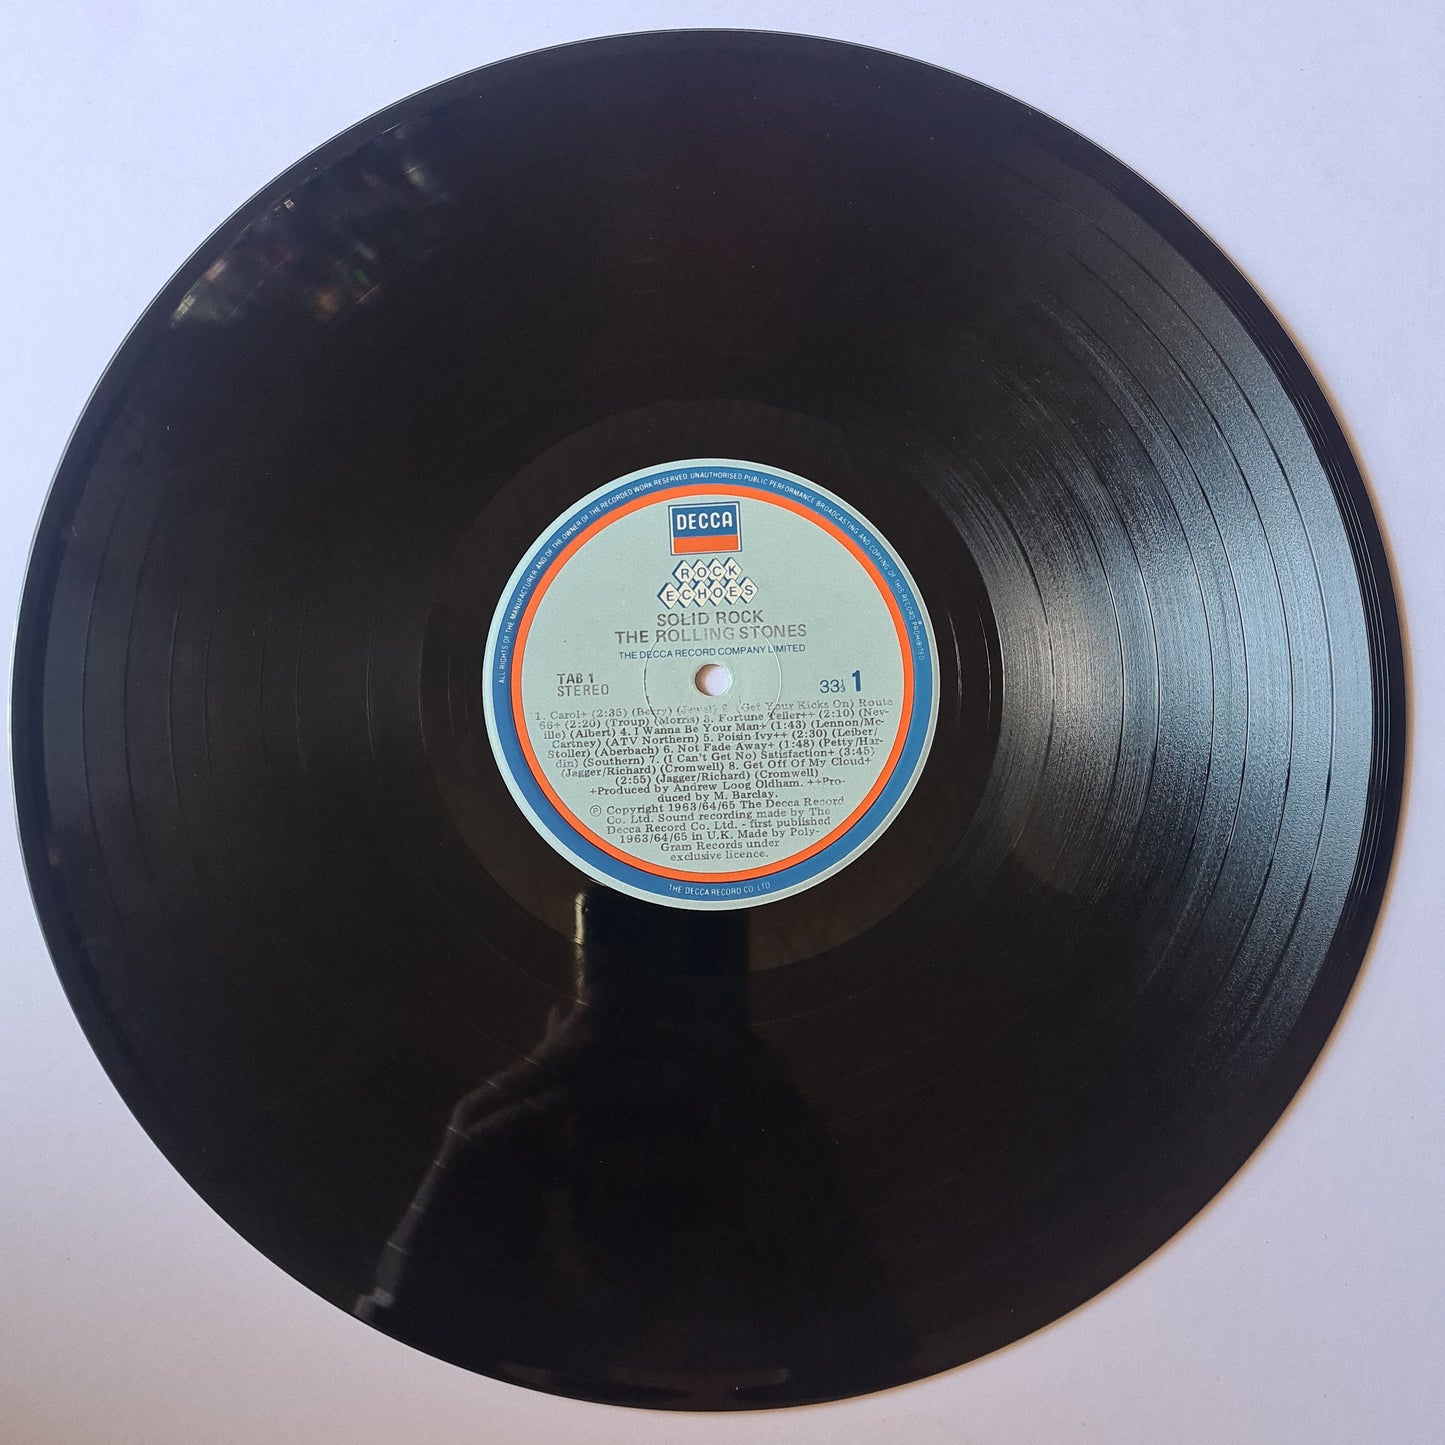 The Rolling Stones – Solid Rock - 1981 - Vinyl Record